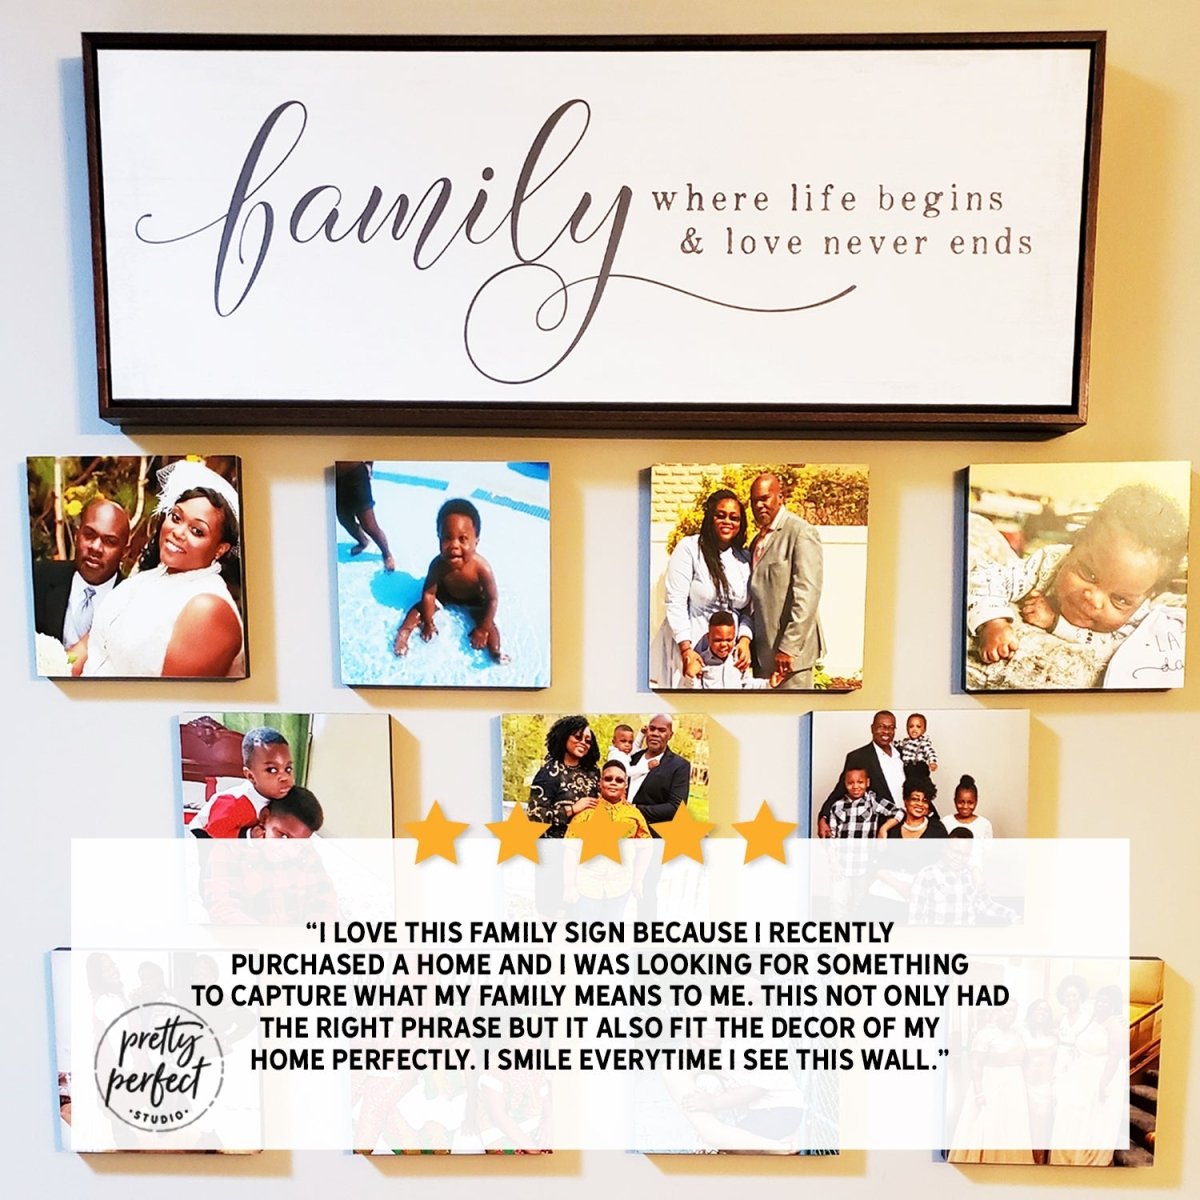 Customer product review for family where life begins and love never ends sign by Pretty Perfect Studio